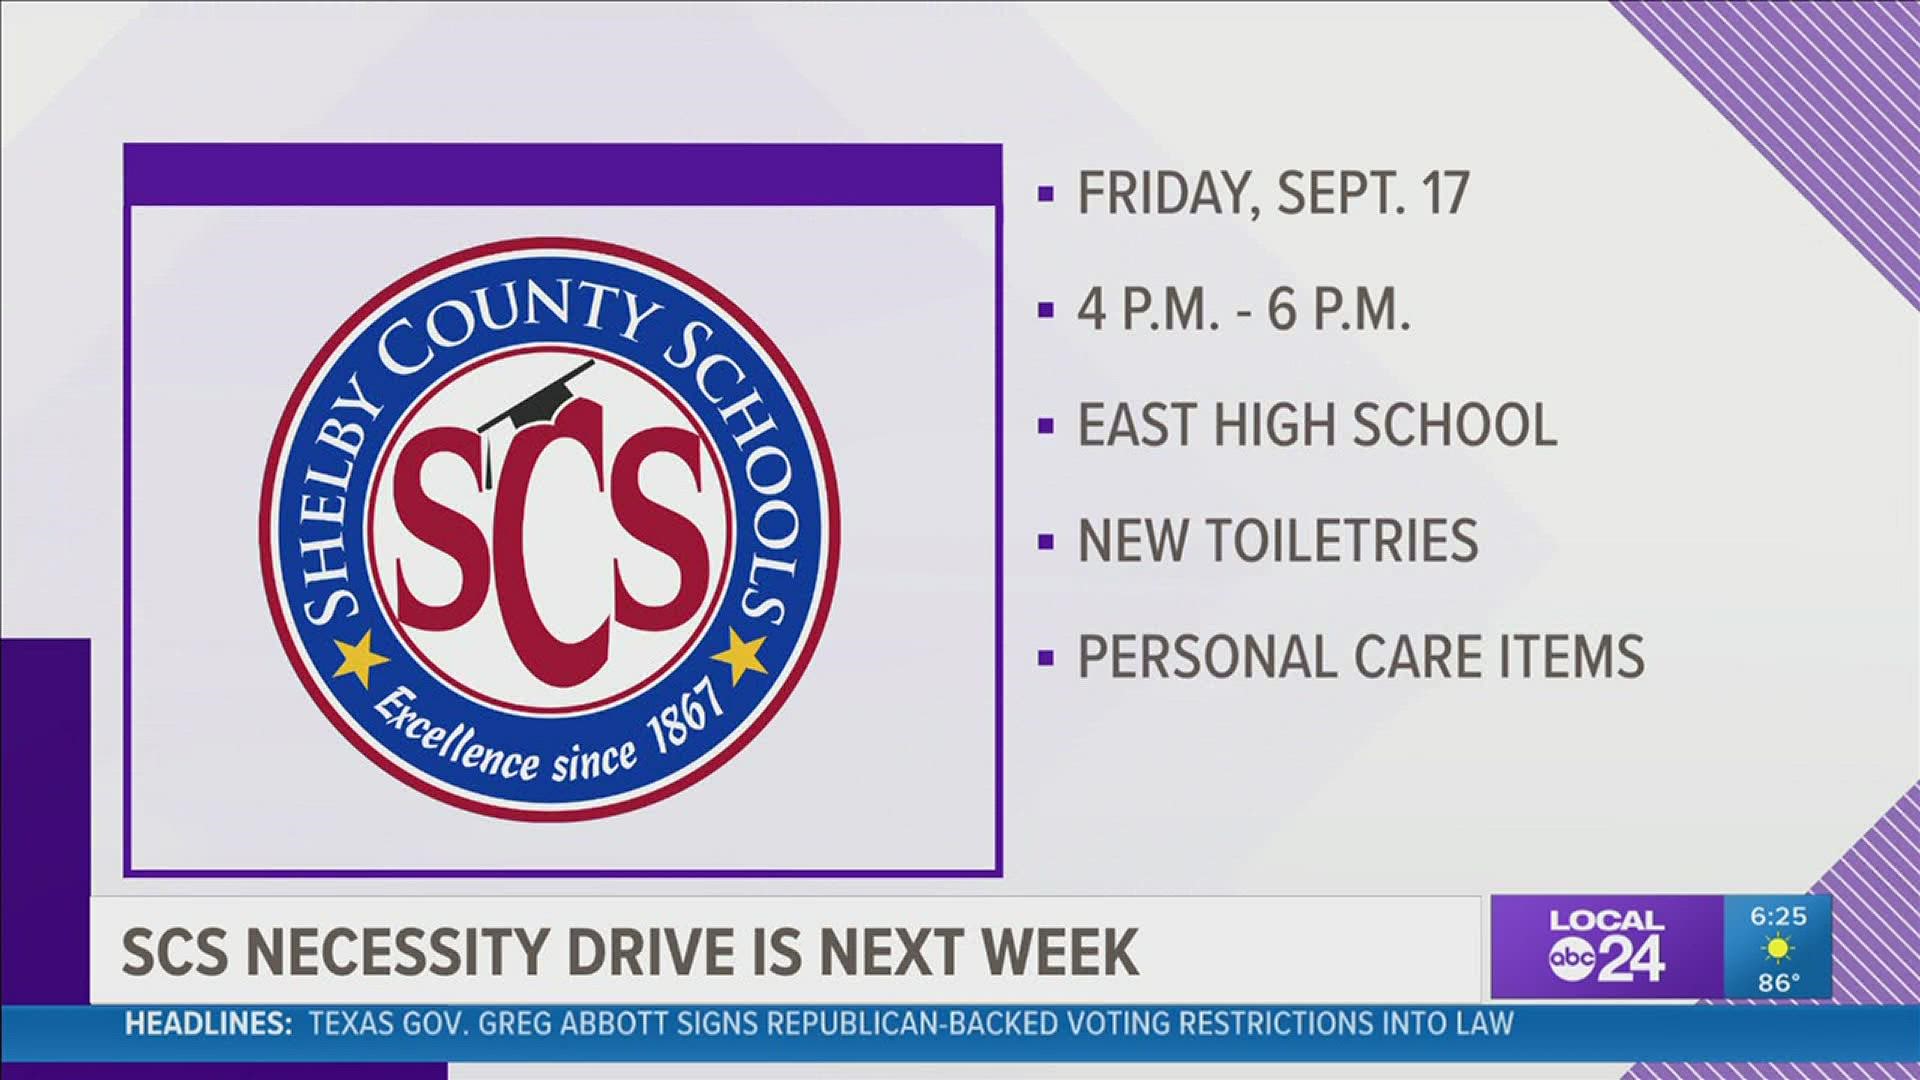 The school district’s 4th Annual Necessity Drive provides an opportunity to support students.